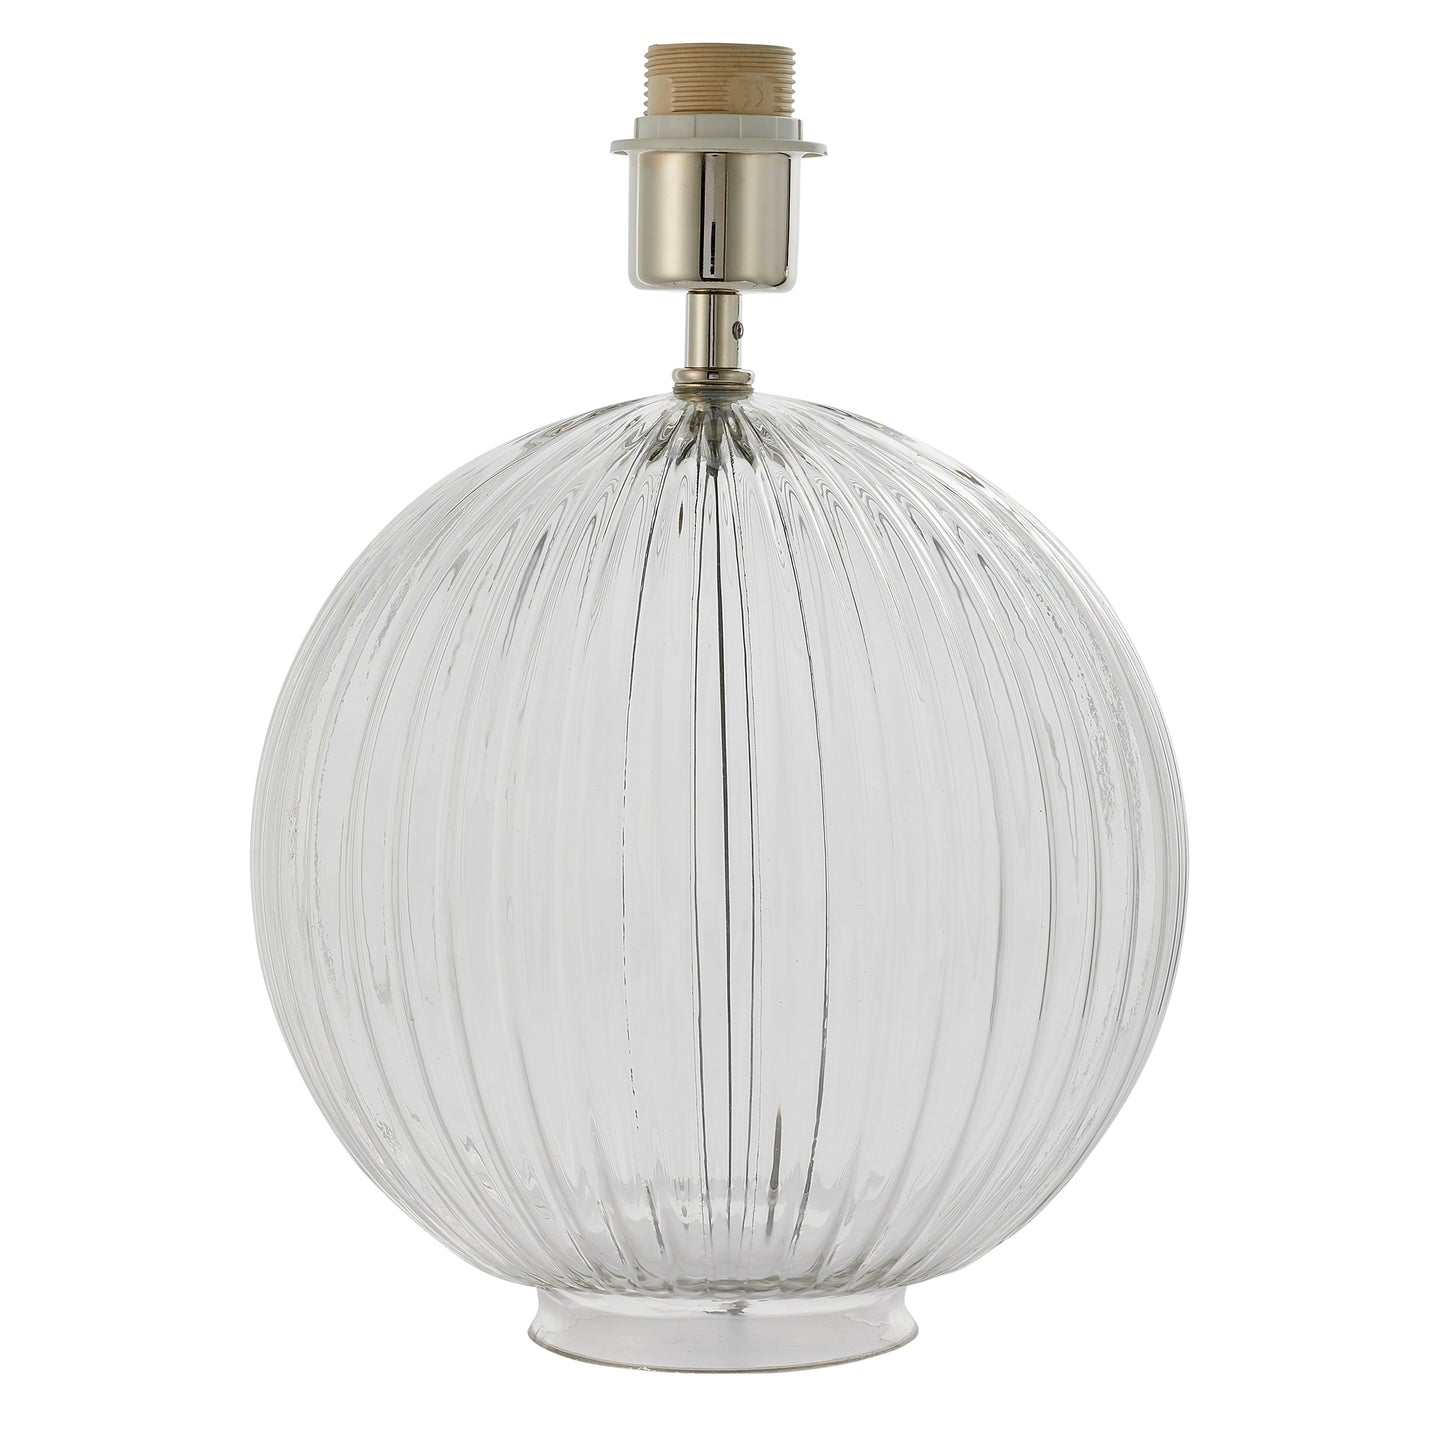 Jemma Table Lamp Clear